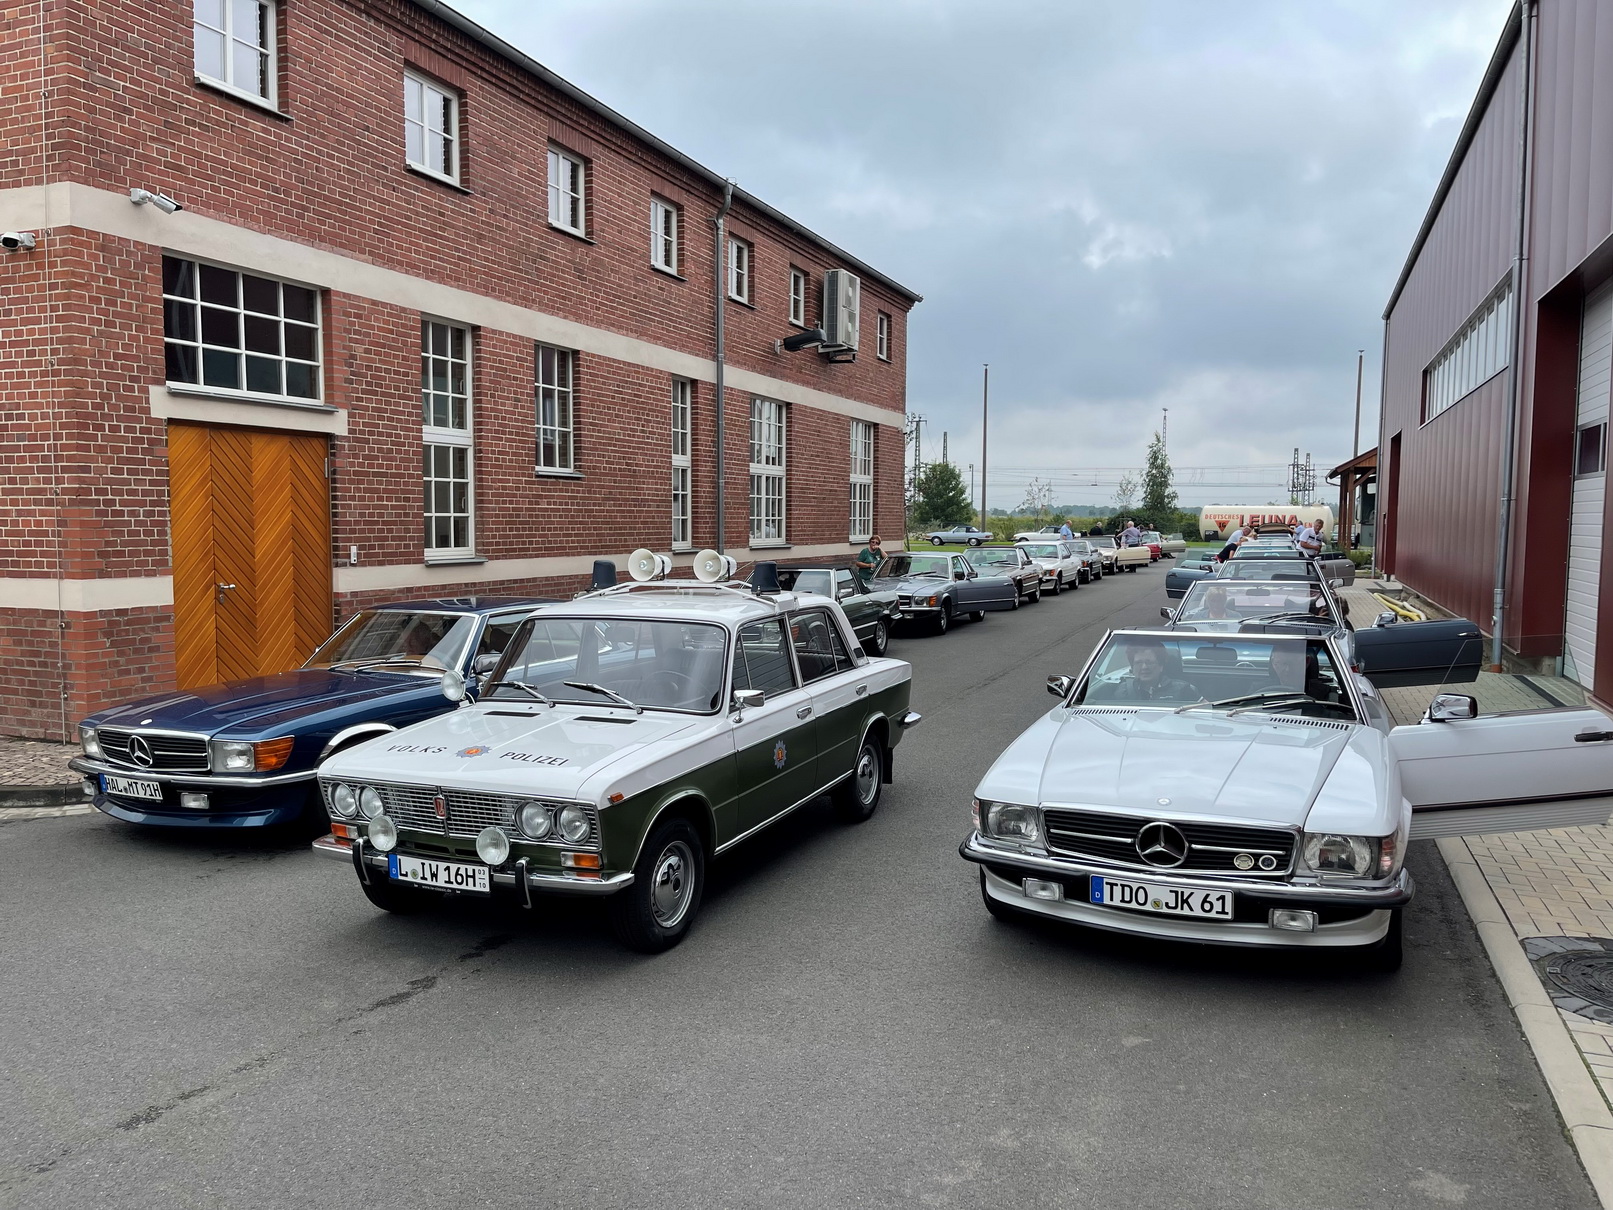 17.07.2021 – Mercedes W 107 enthusiasts for a visit